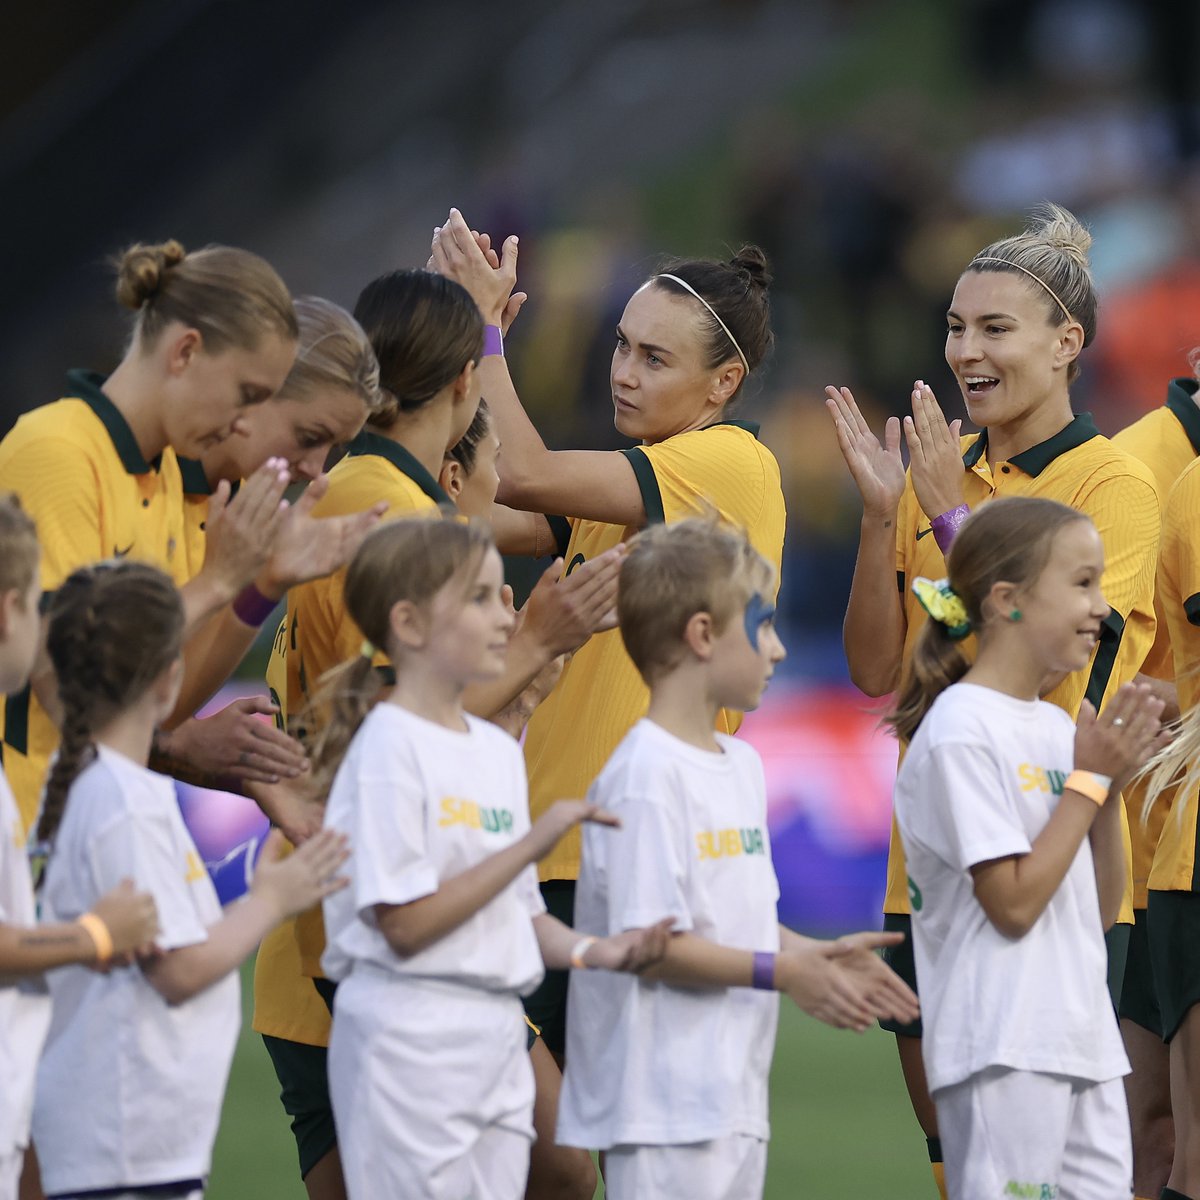 For those wondering, @TheMatildas are tonight showing their support for @PlayersCanadian by wearing purple wrist bands for their final #CupOfNations match 💜

#SupportingThePlayers 
#Solidarity ✊